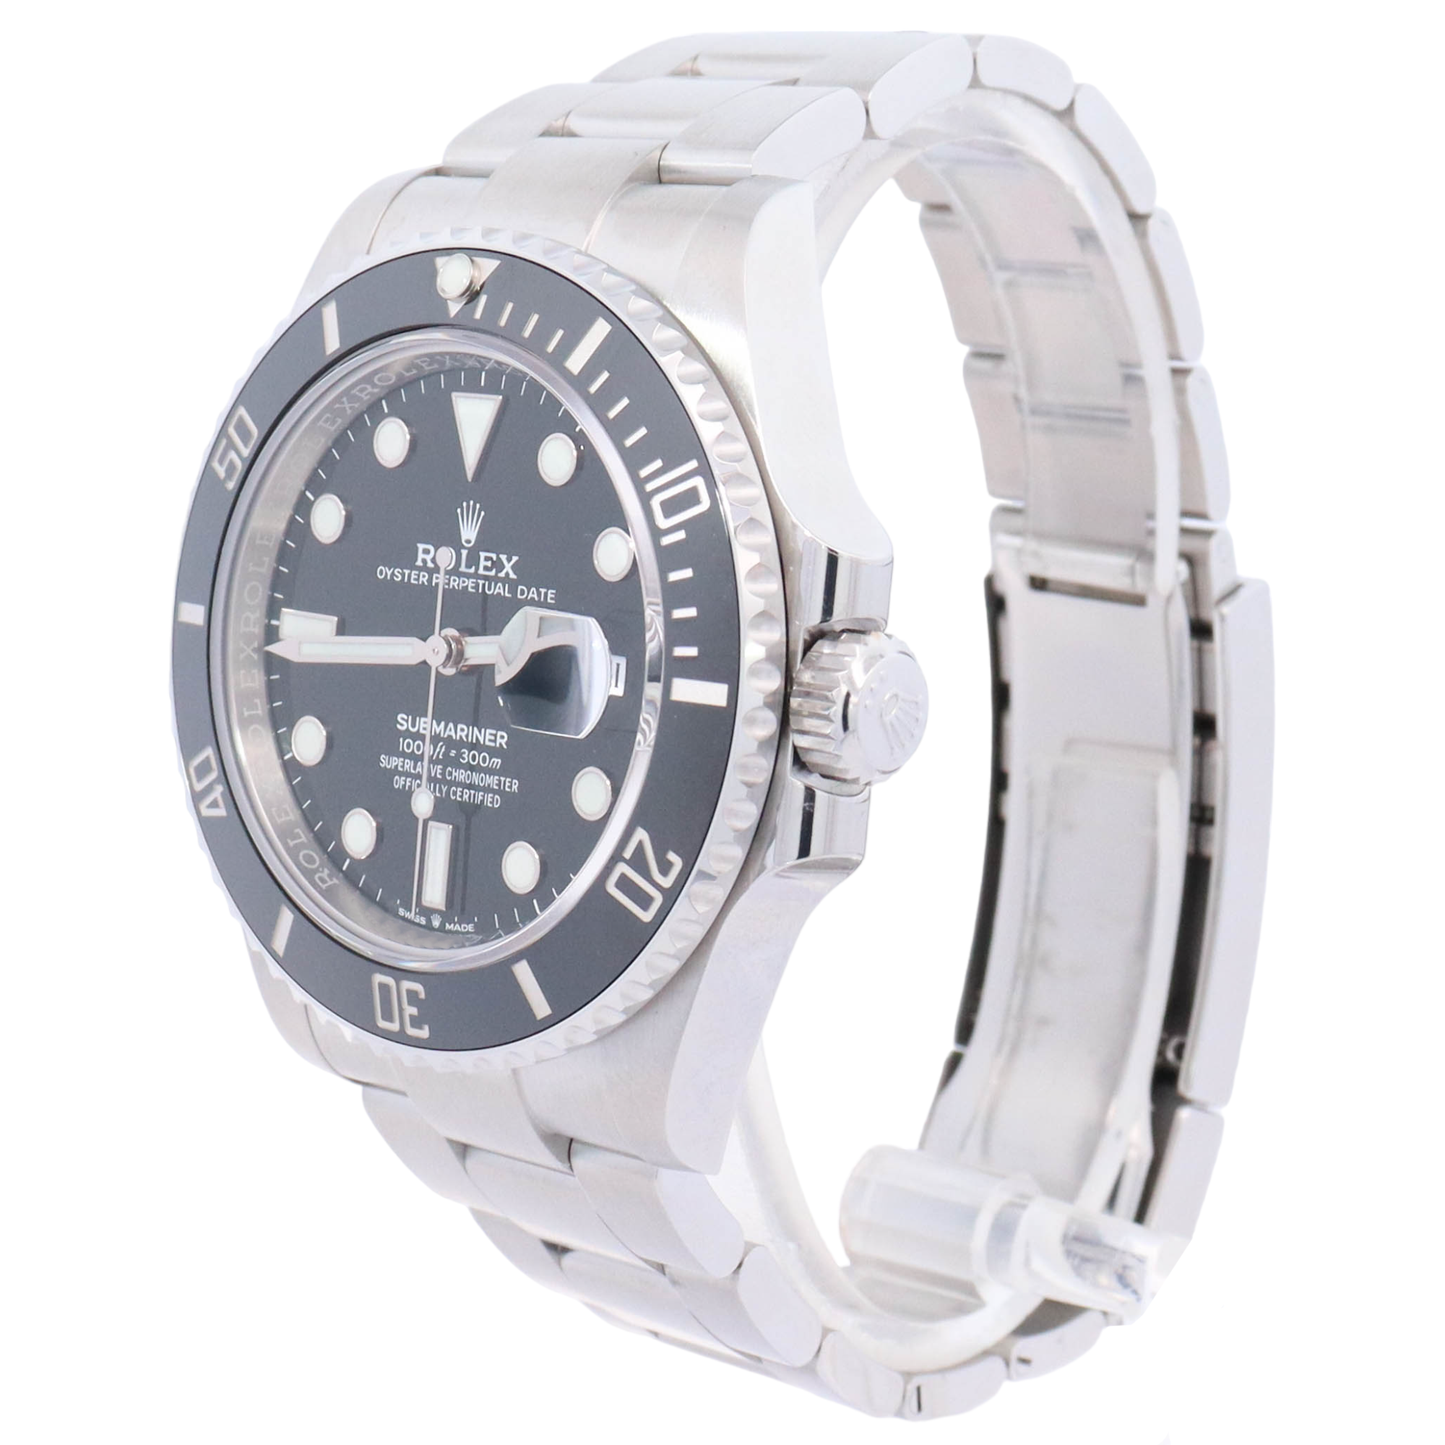 Load image into Gallery viewer, Rolex Submariner 41mm Stainless Steel Black Dot Dial Watch Reference# 126610LN - Happy Jewelers Fine Jewelry Lifetime Warranty
